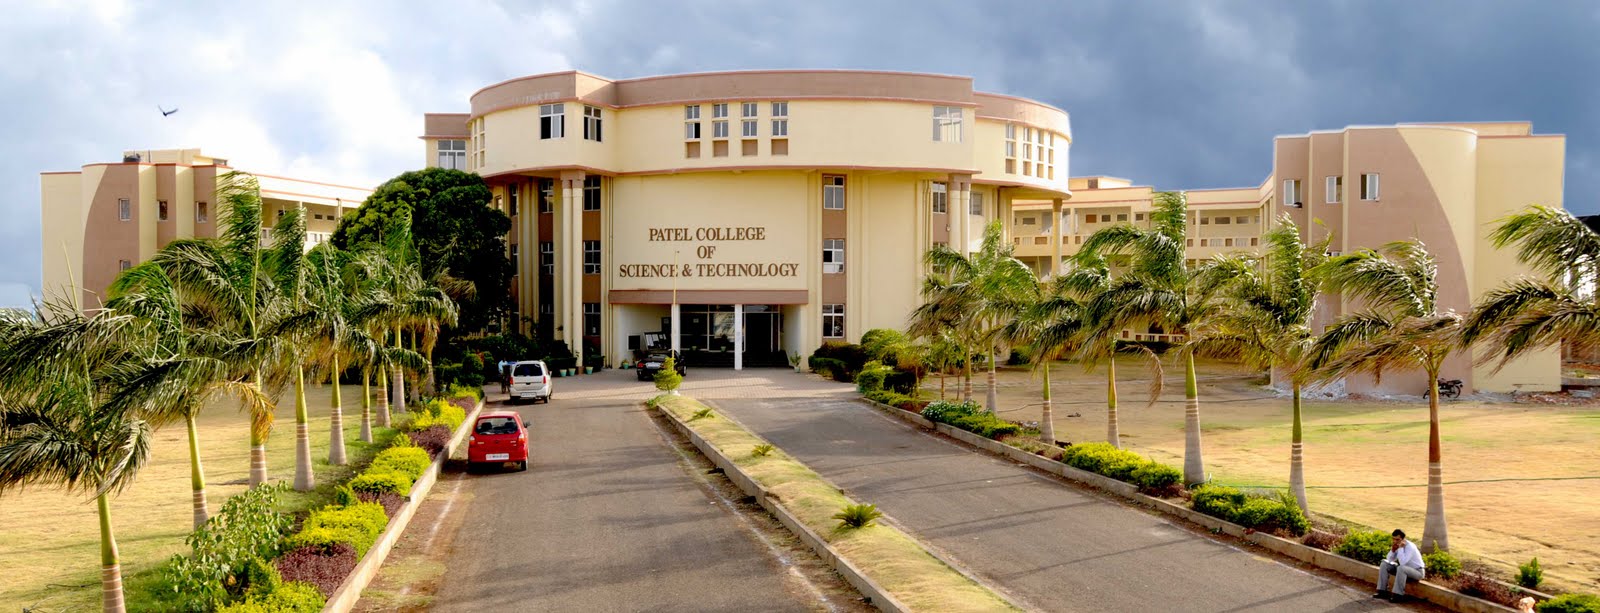 Patel College Of Science And Technology, Indore Image